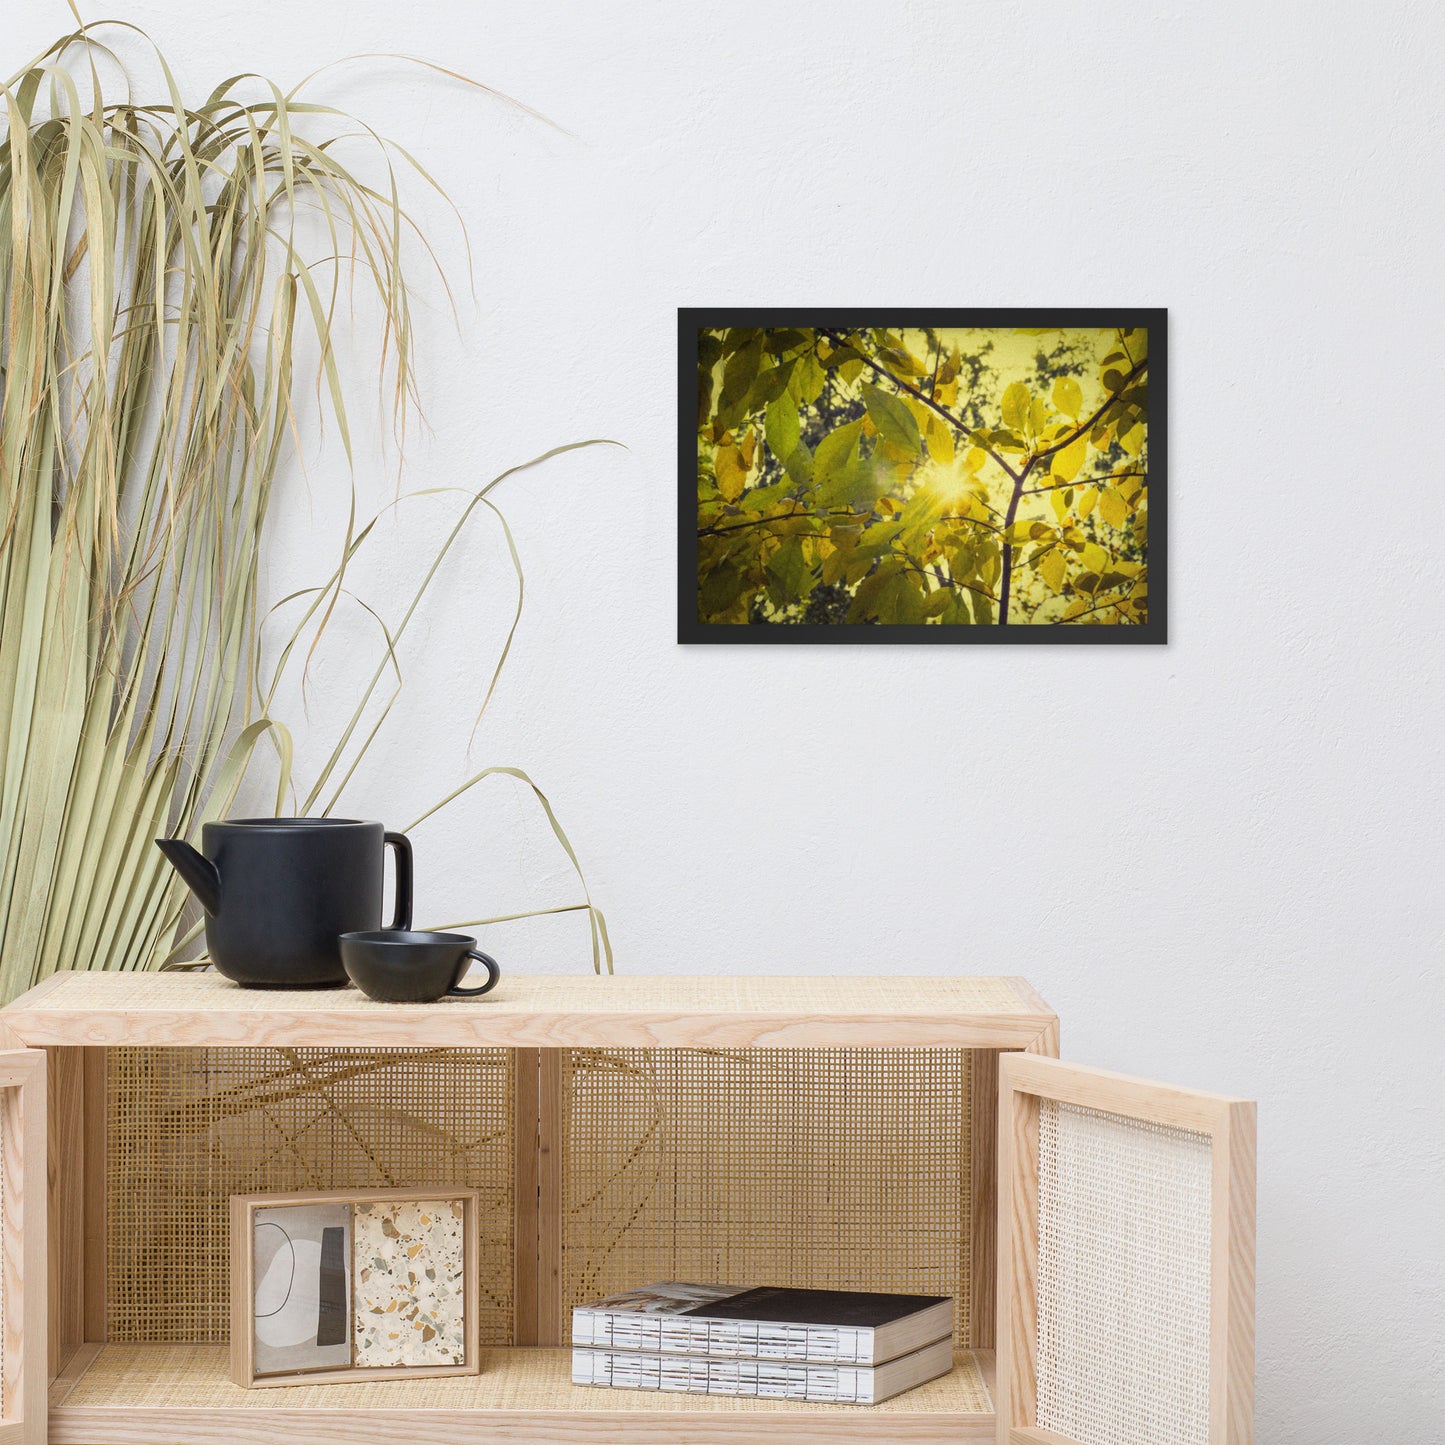 Rustic Hallway Wall Decor: Aged Golden Leaves Abstract / Country Farmhouse Style / Botanical / Nature Photo Framed Wall Art Print - Artwork - Home Decor